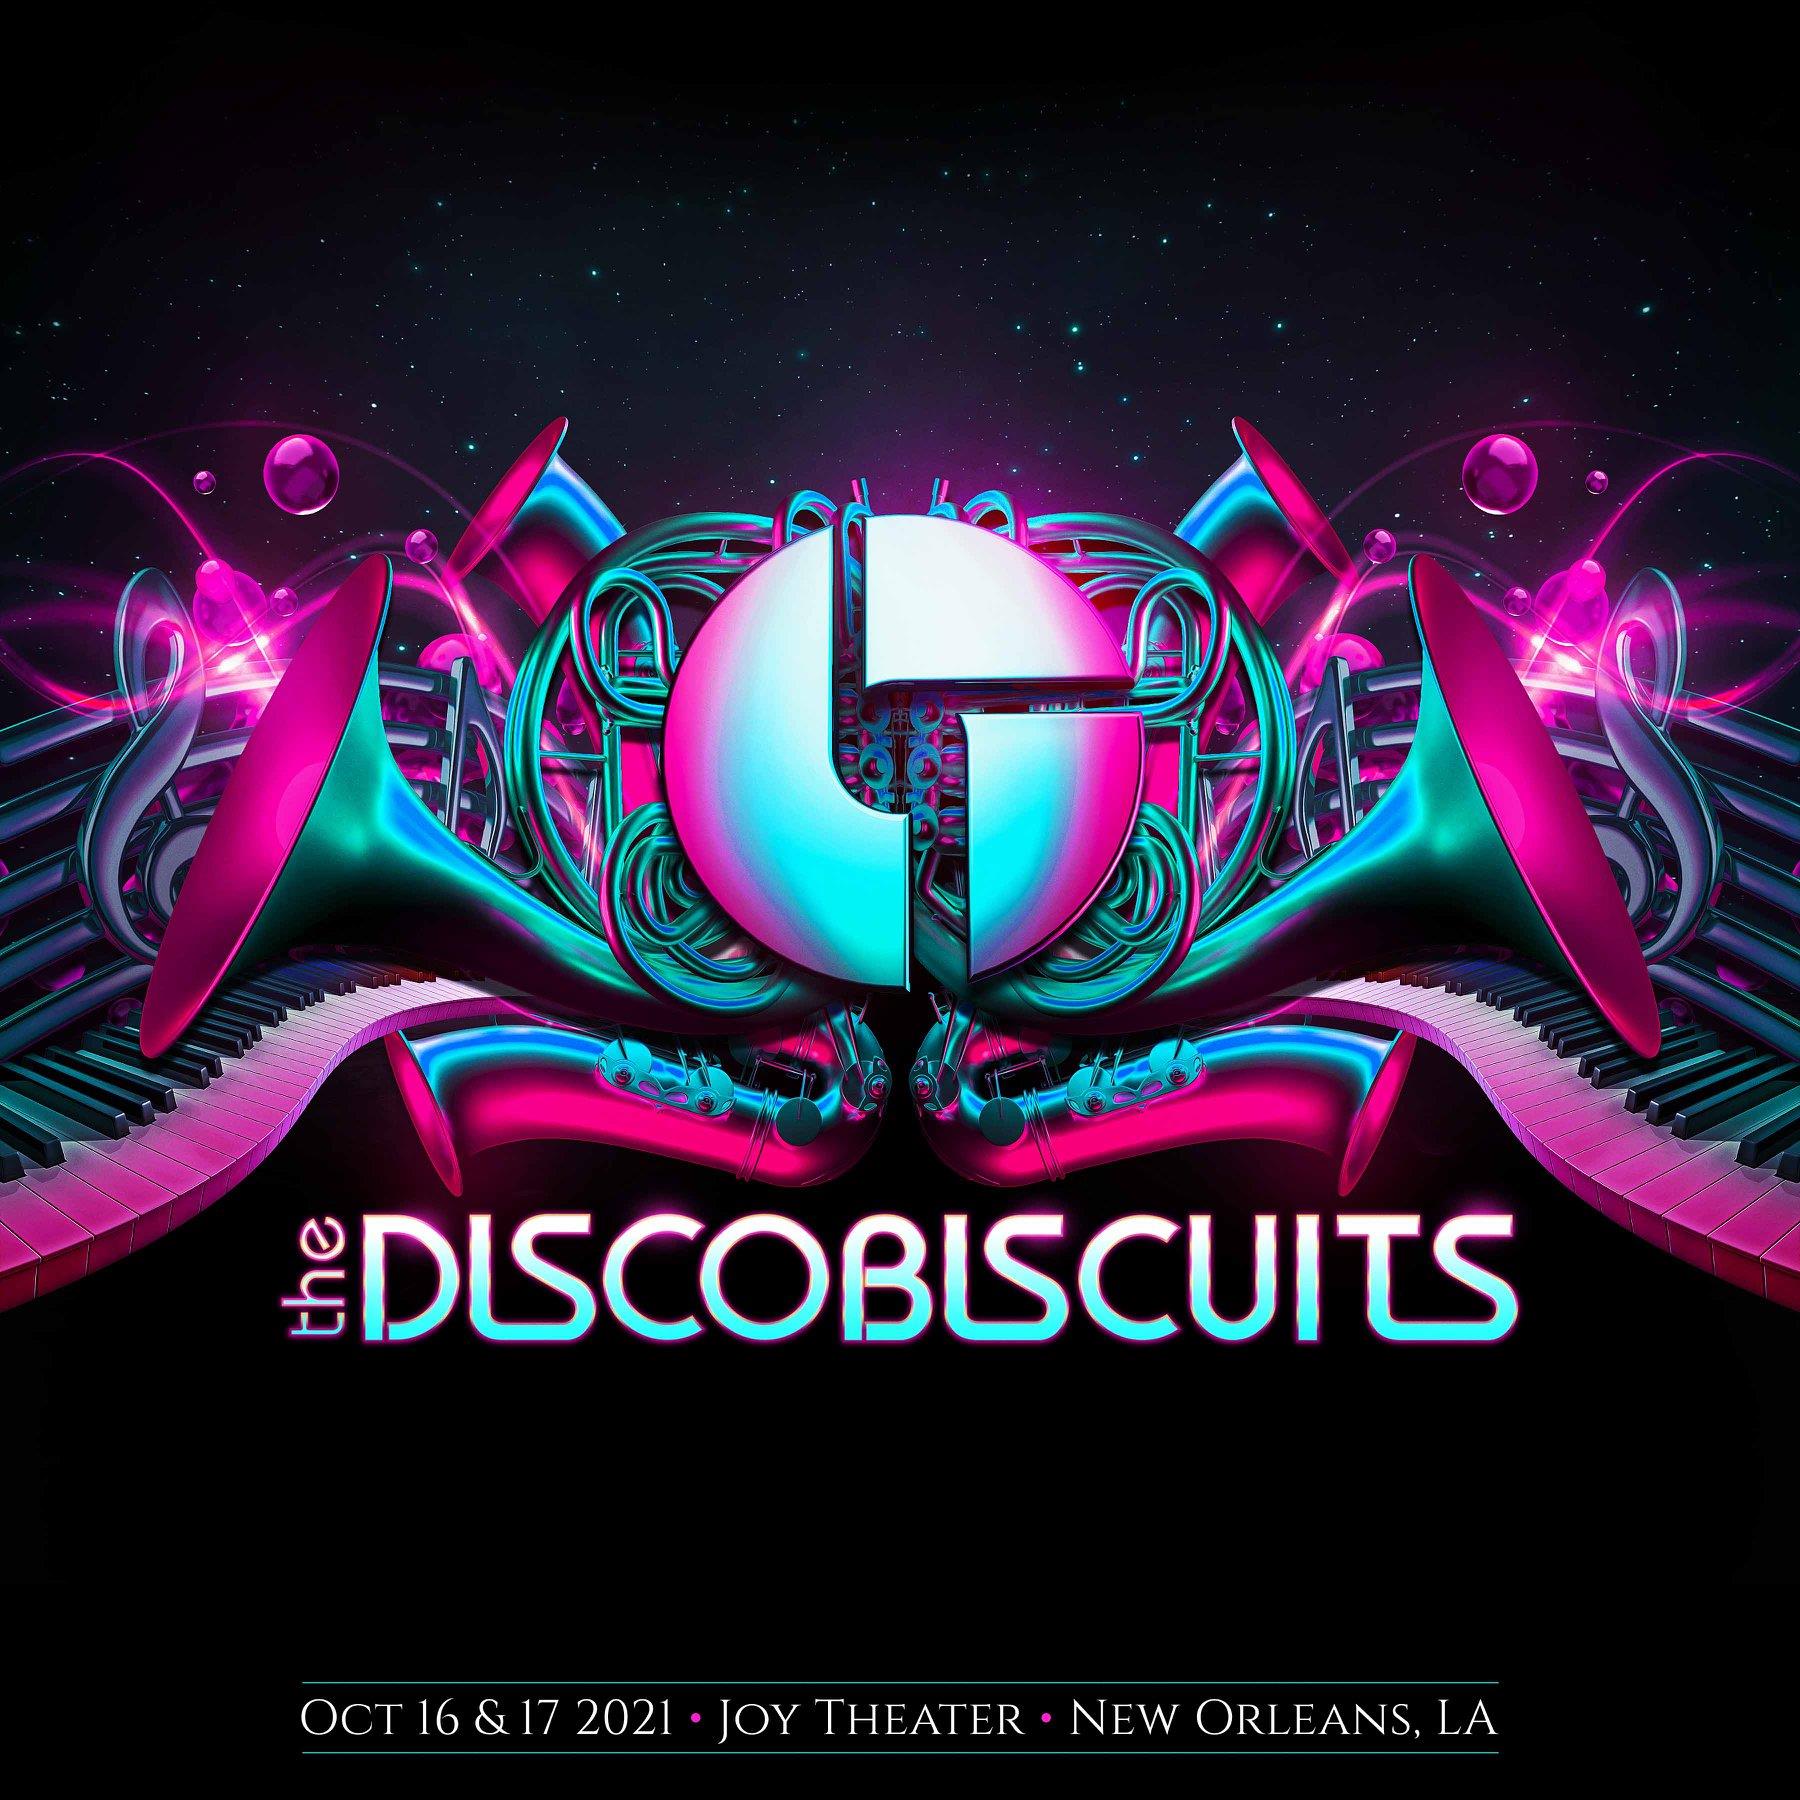 The Disco Biscuits Announce TwoNight New Orleans Run